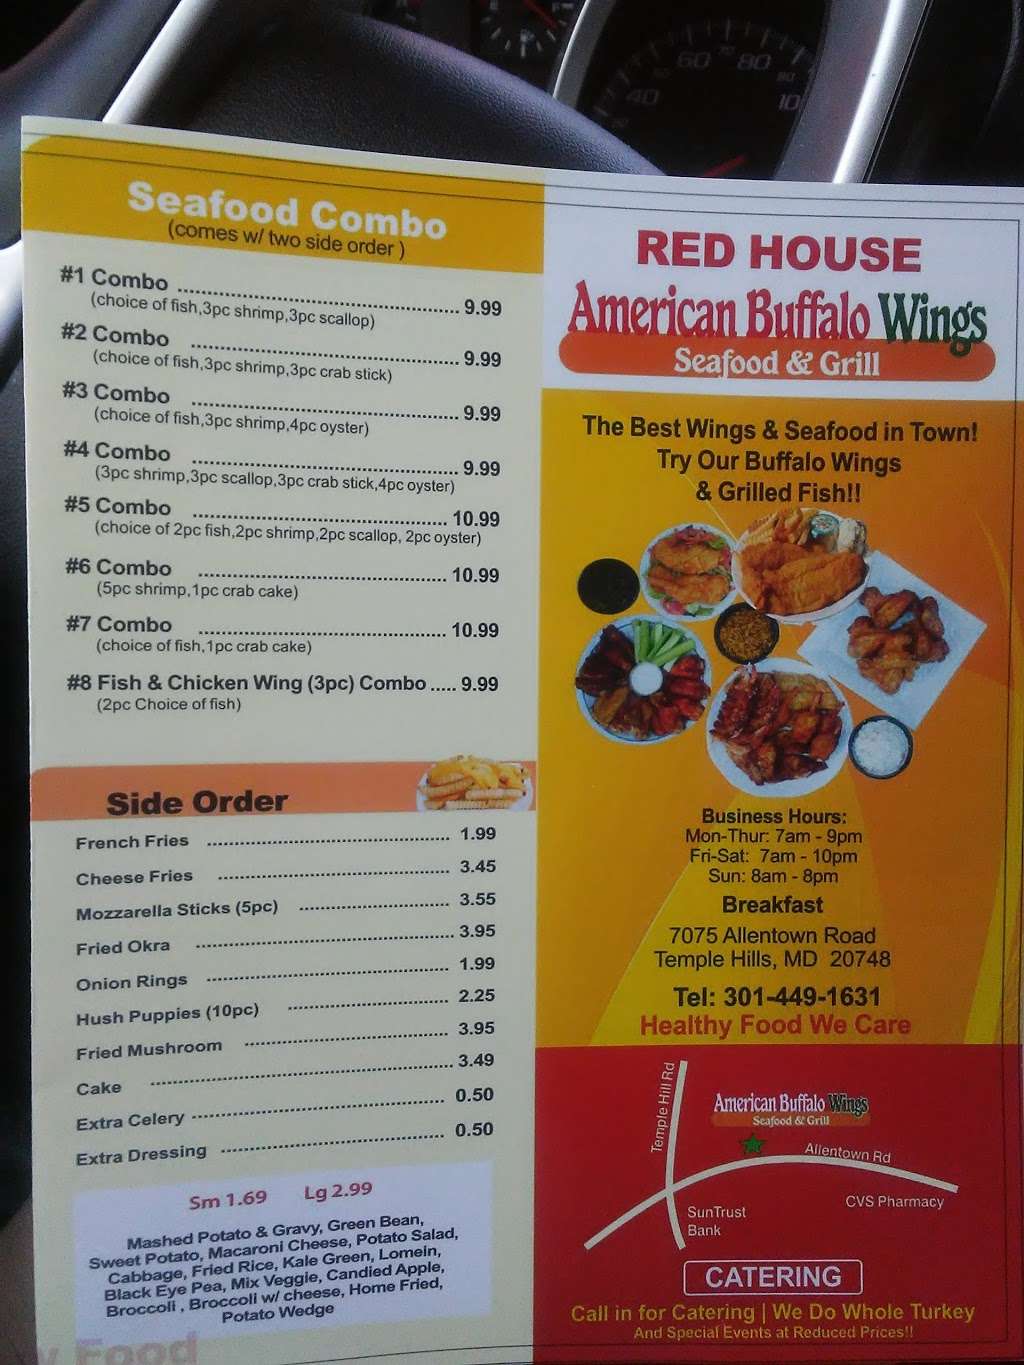 Red House American Buffalo Wings Seafoods & Grill | 7075 Allentown Rd, Camp Springs, MD 20748 | Phone: (301) 449-1631